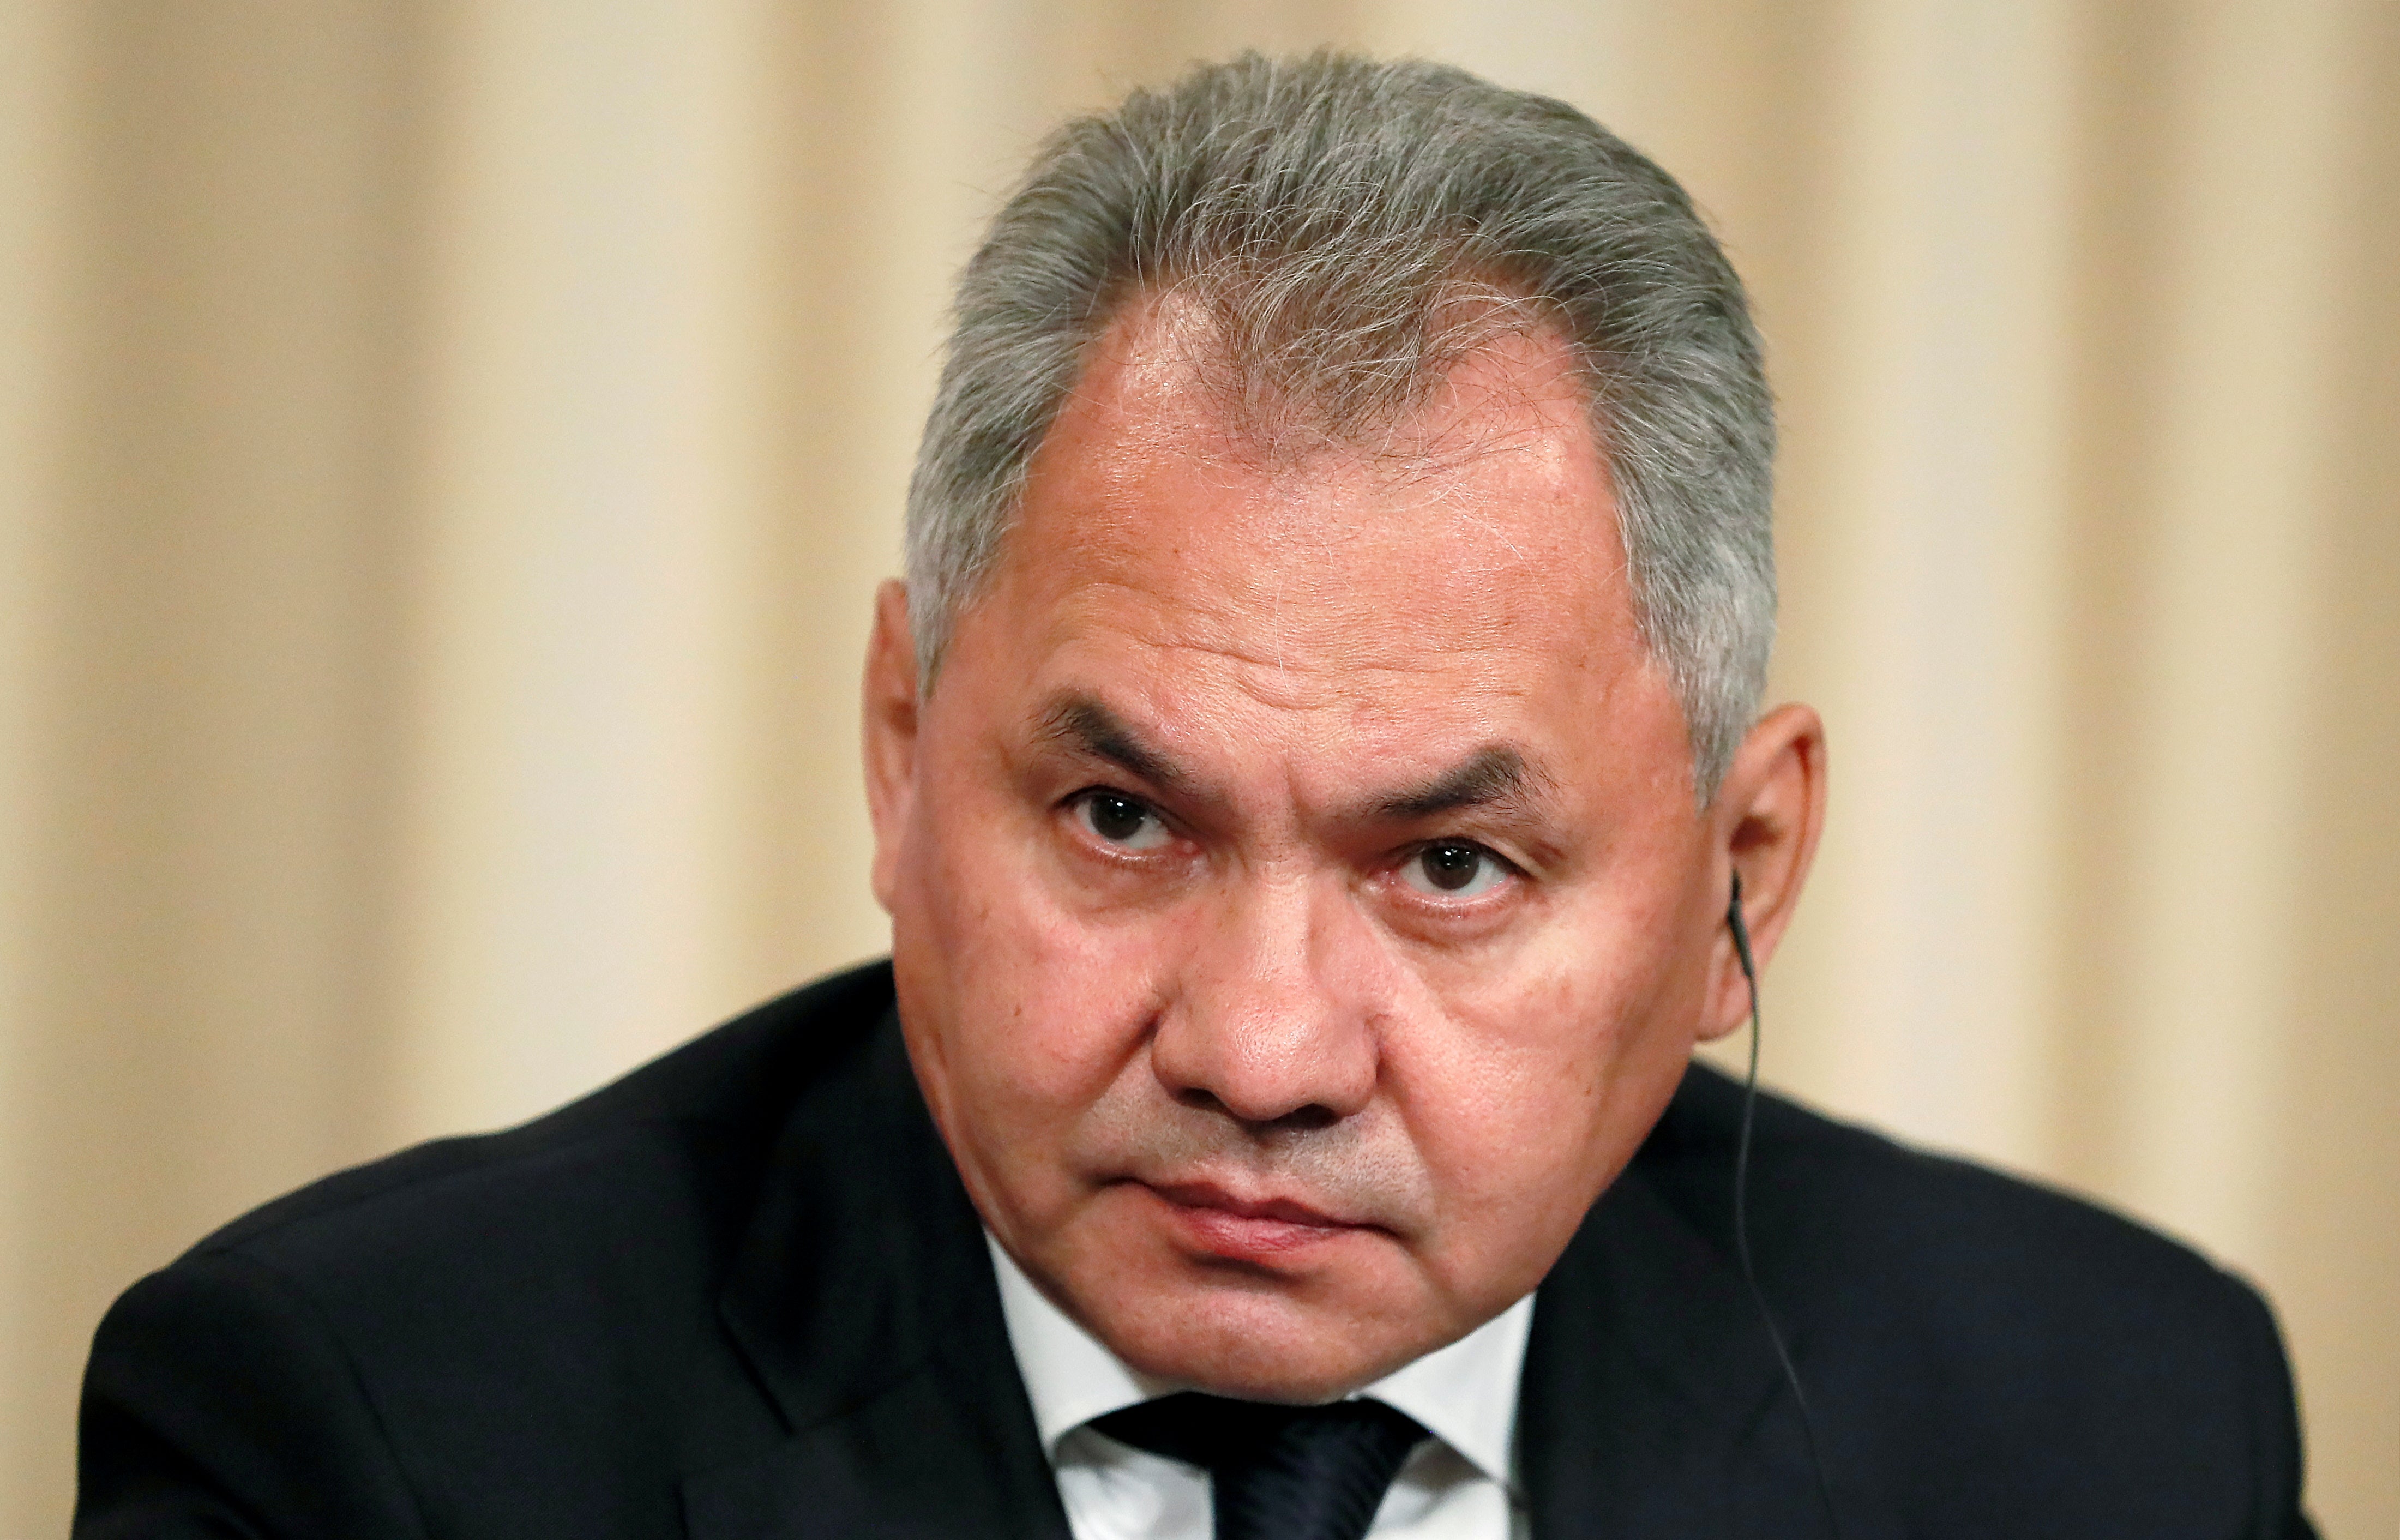 Russian defence minister Sergei Shoigu blames the current security situation in Afghanistan on the hasty US troop withdrawal